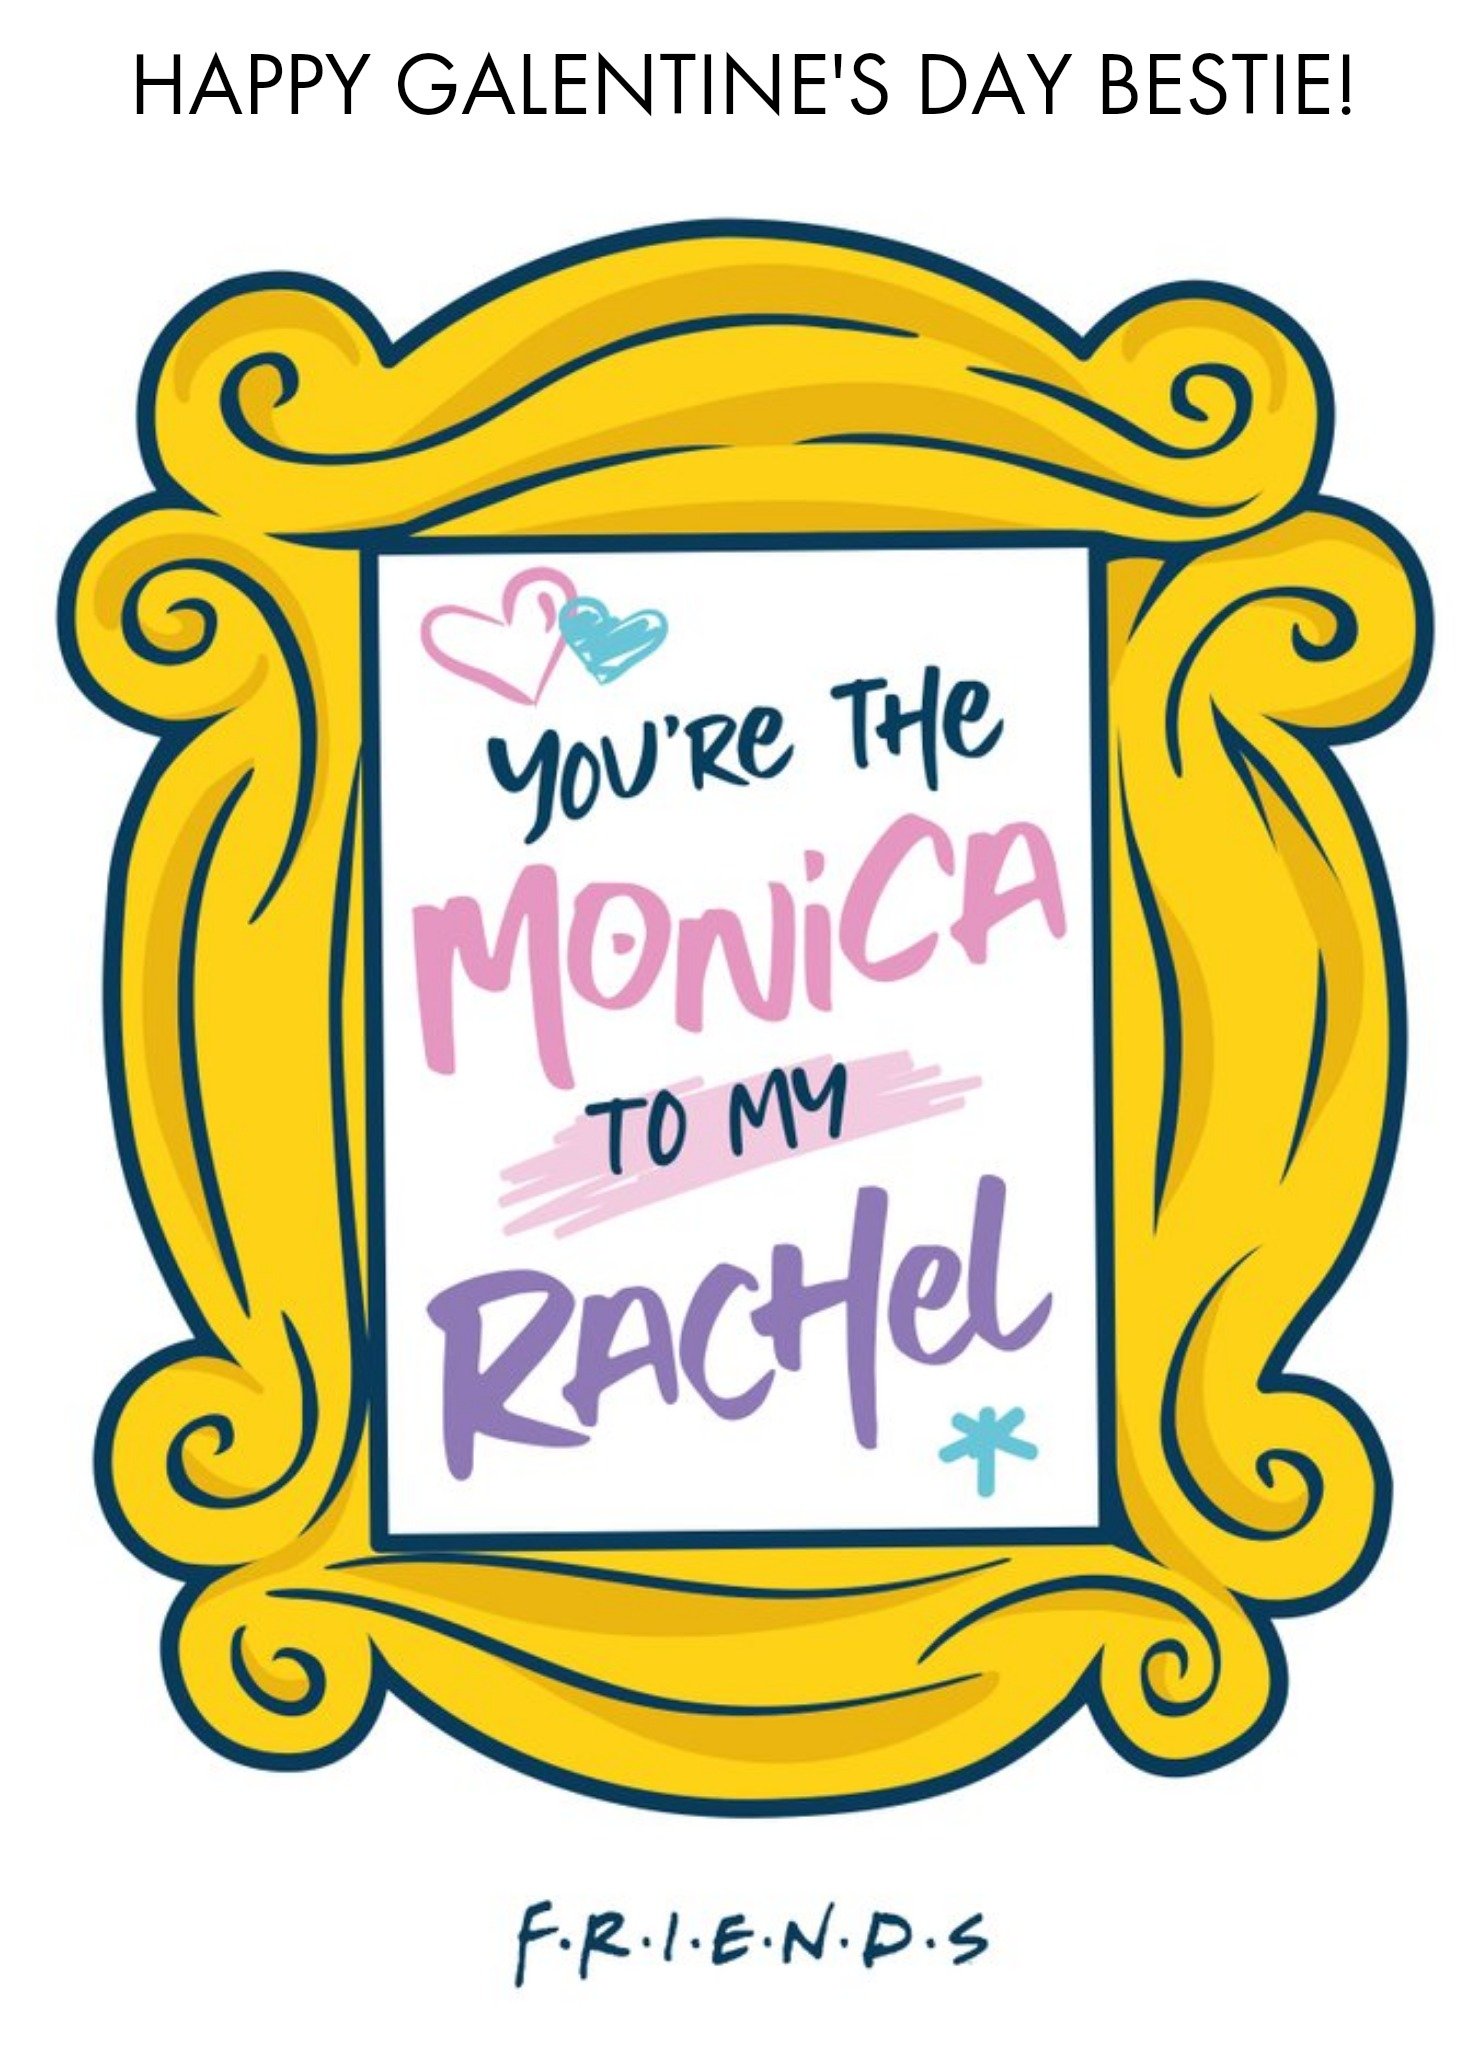 Moonpig Friends Tv You Are The Monica To My Rachel Happy Galentines Day Card, Large